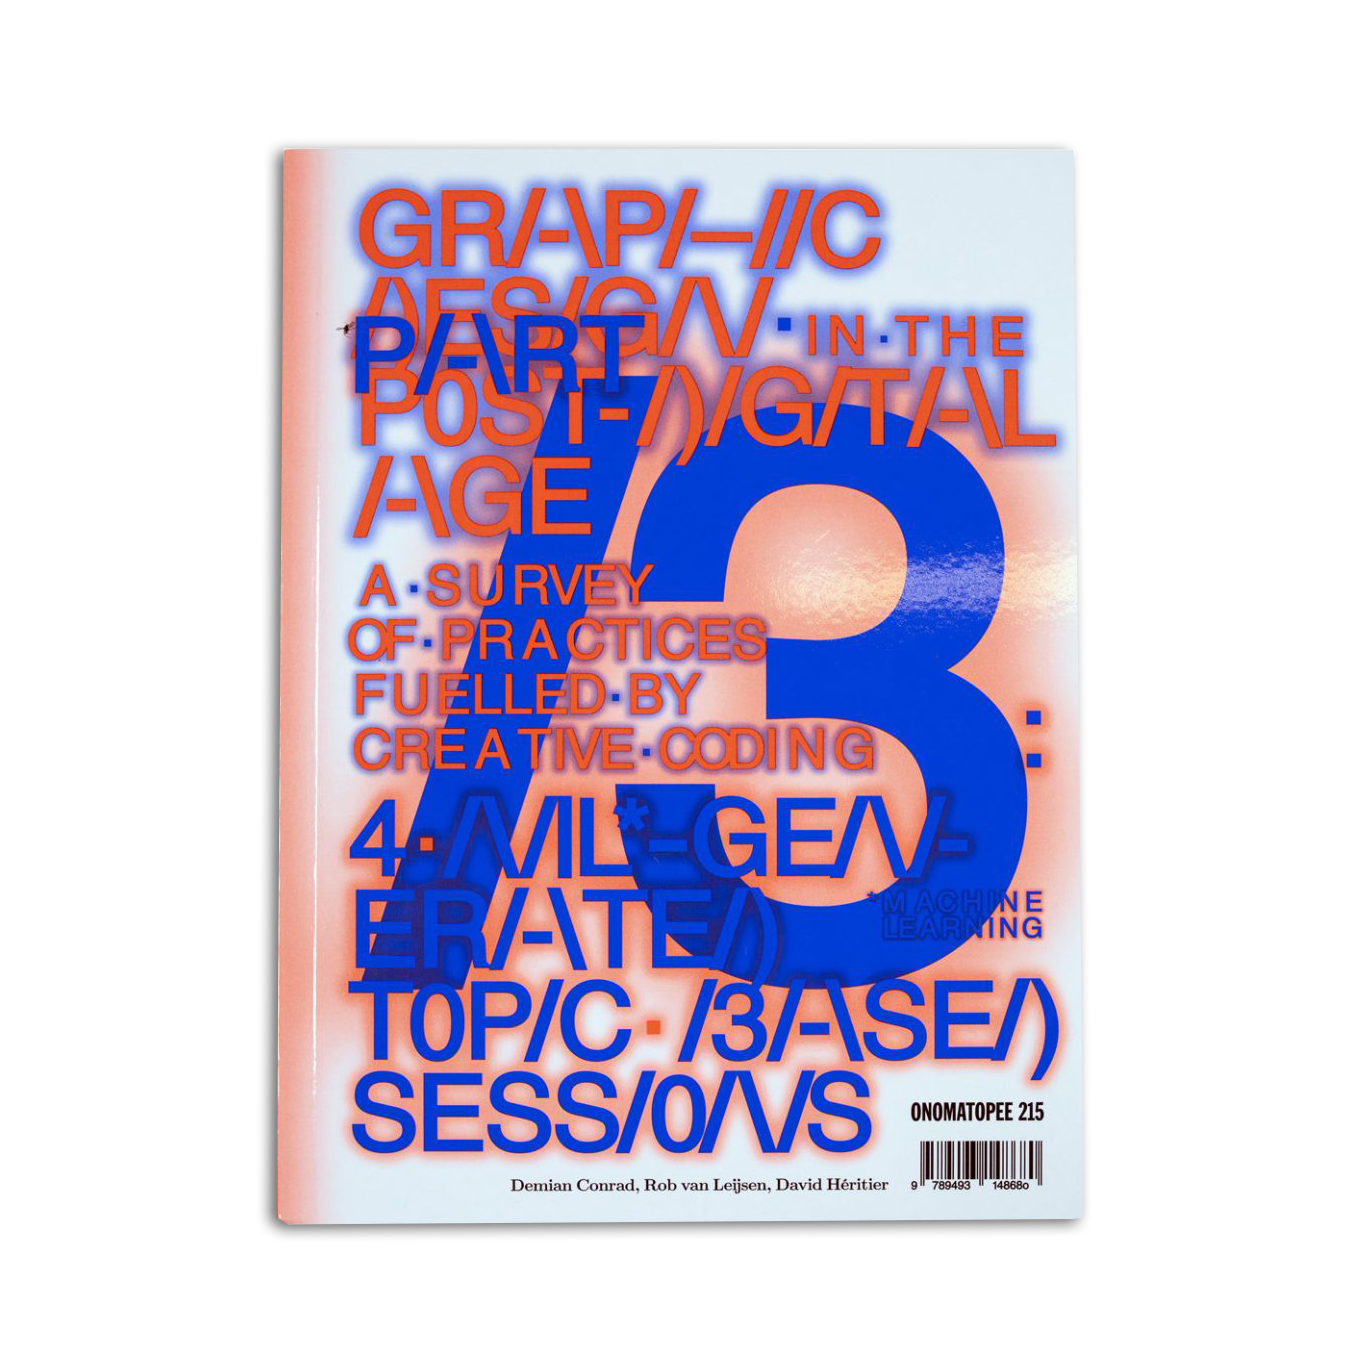 Graphic Design in the Post-Digital Age - A survey of practices fuelled by creative coding